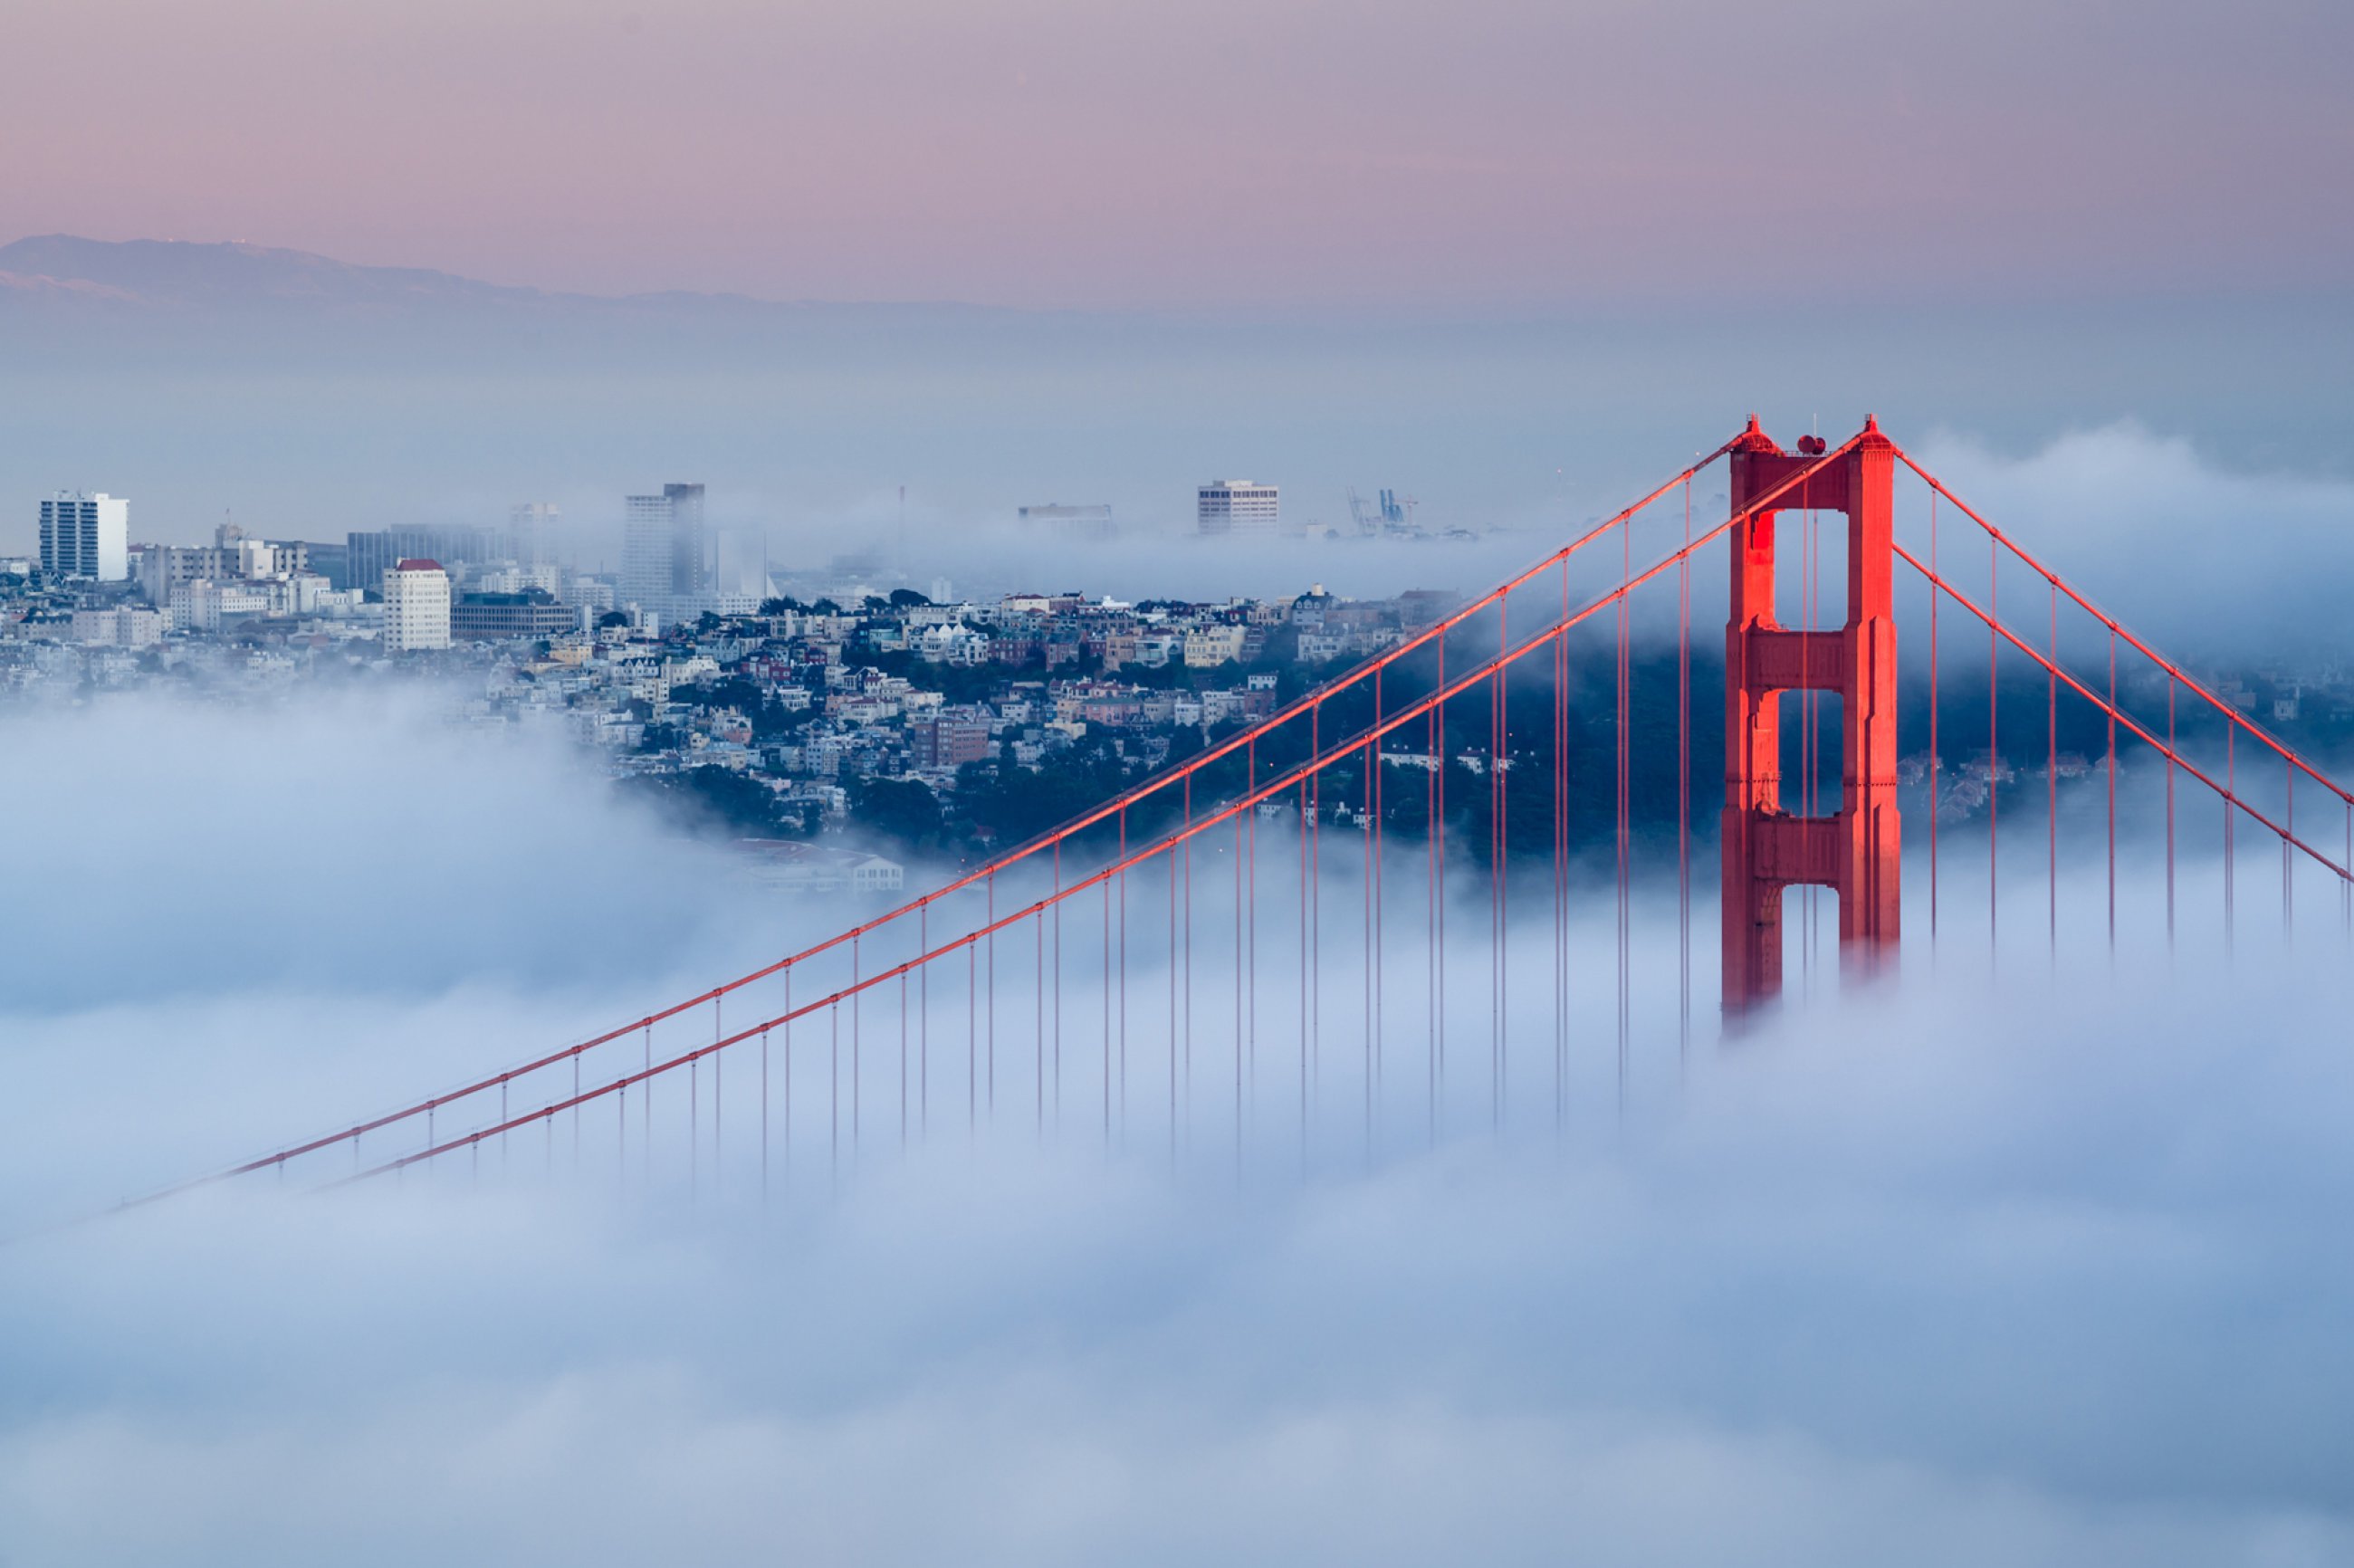 https://bubo.sk/uploads/galleries/4998/sf-san-francisco-golden-gate-at-dawn-surrounded-by-fog.jpg